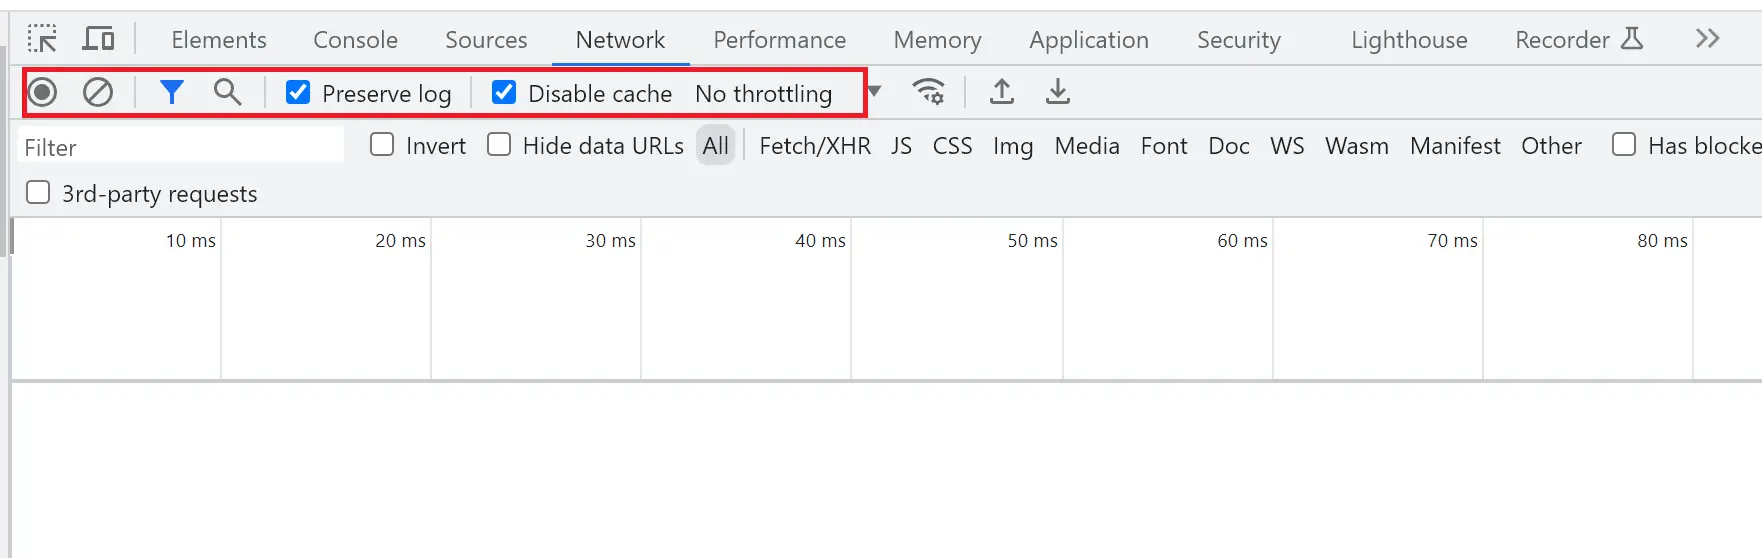 Preserve Log and Disable Cache button enablement in Chrome